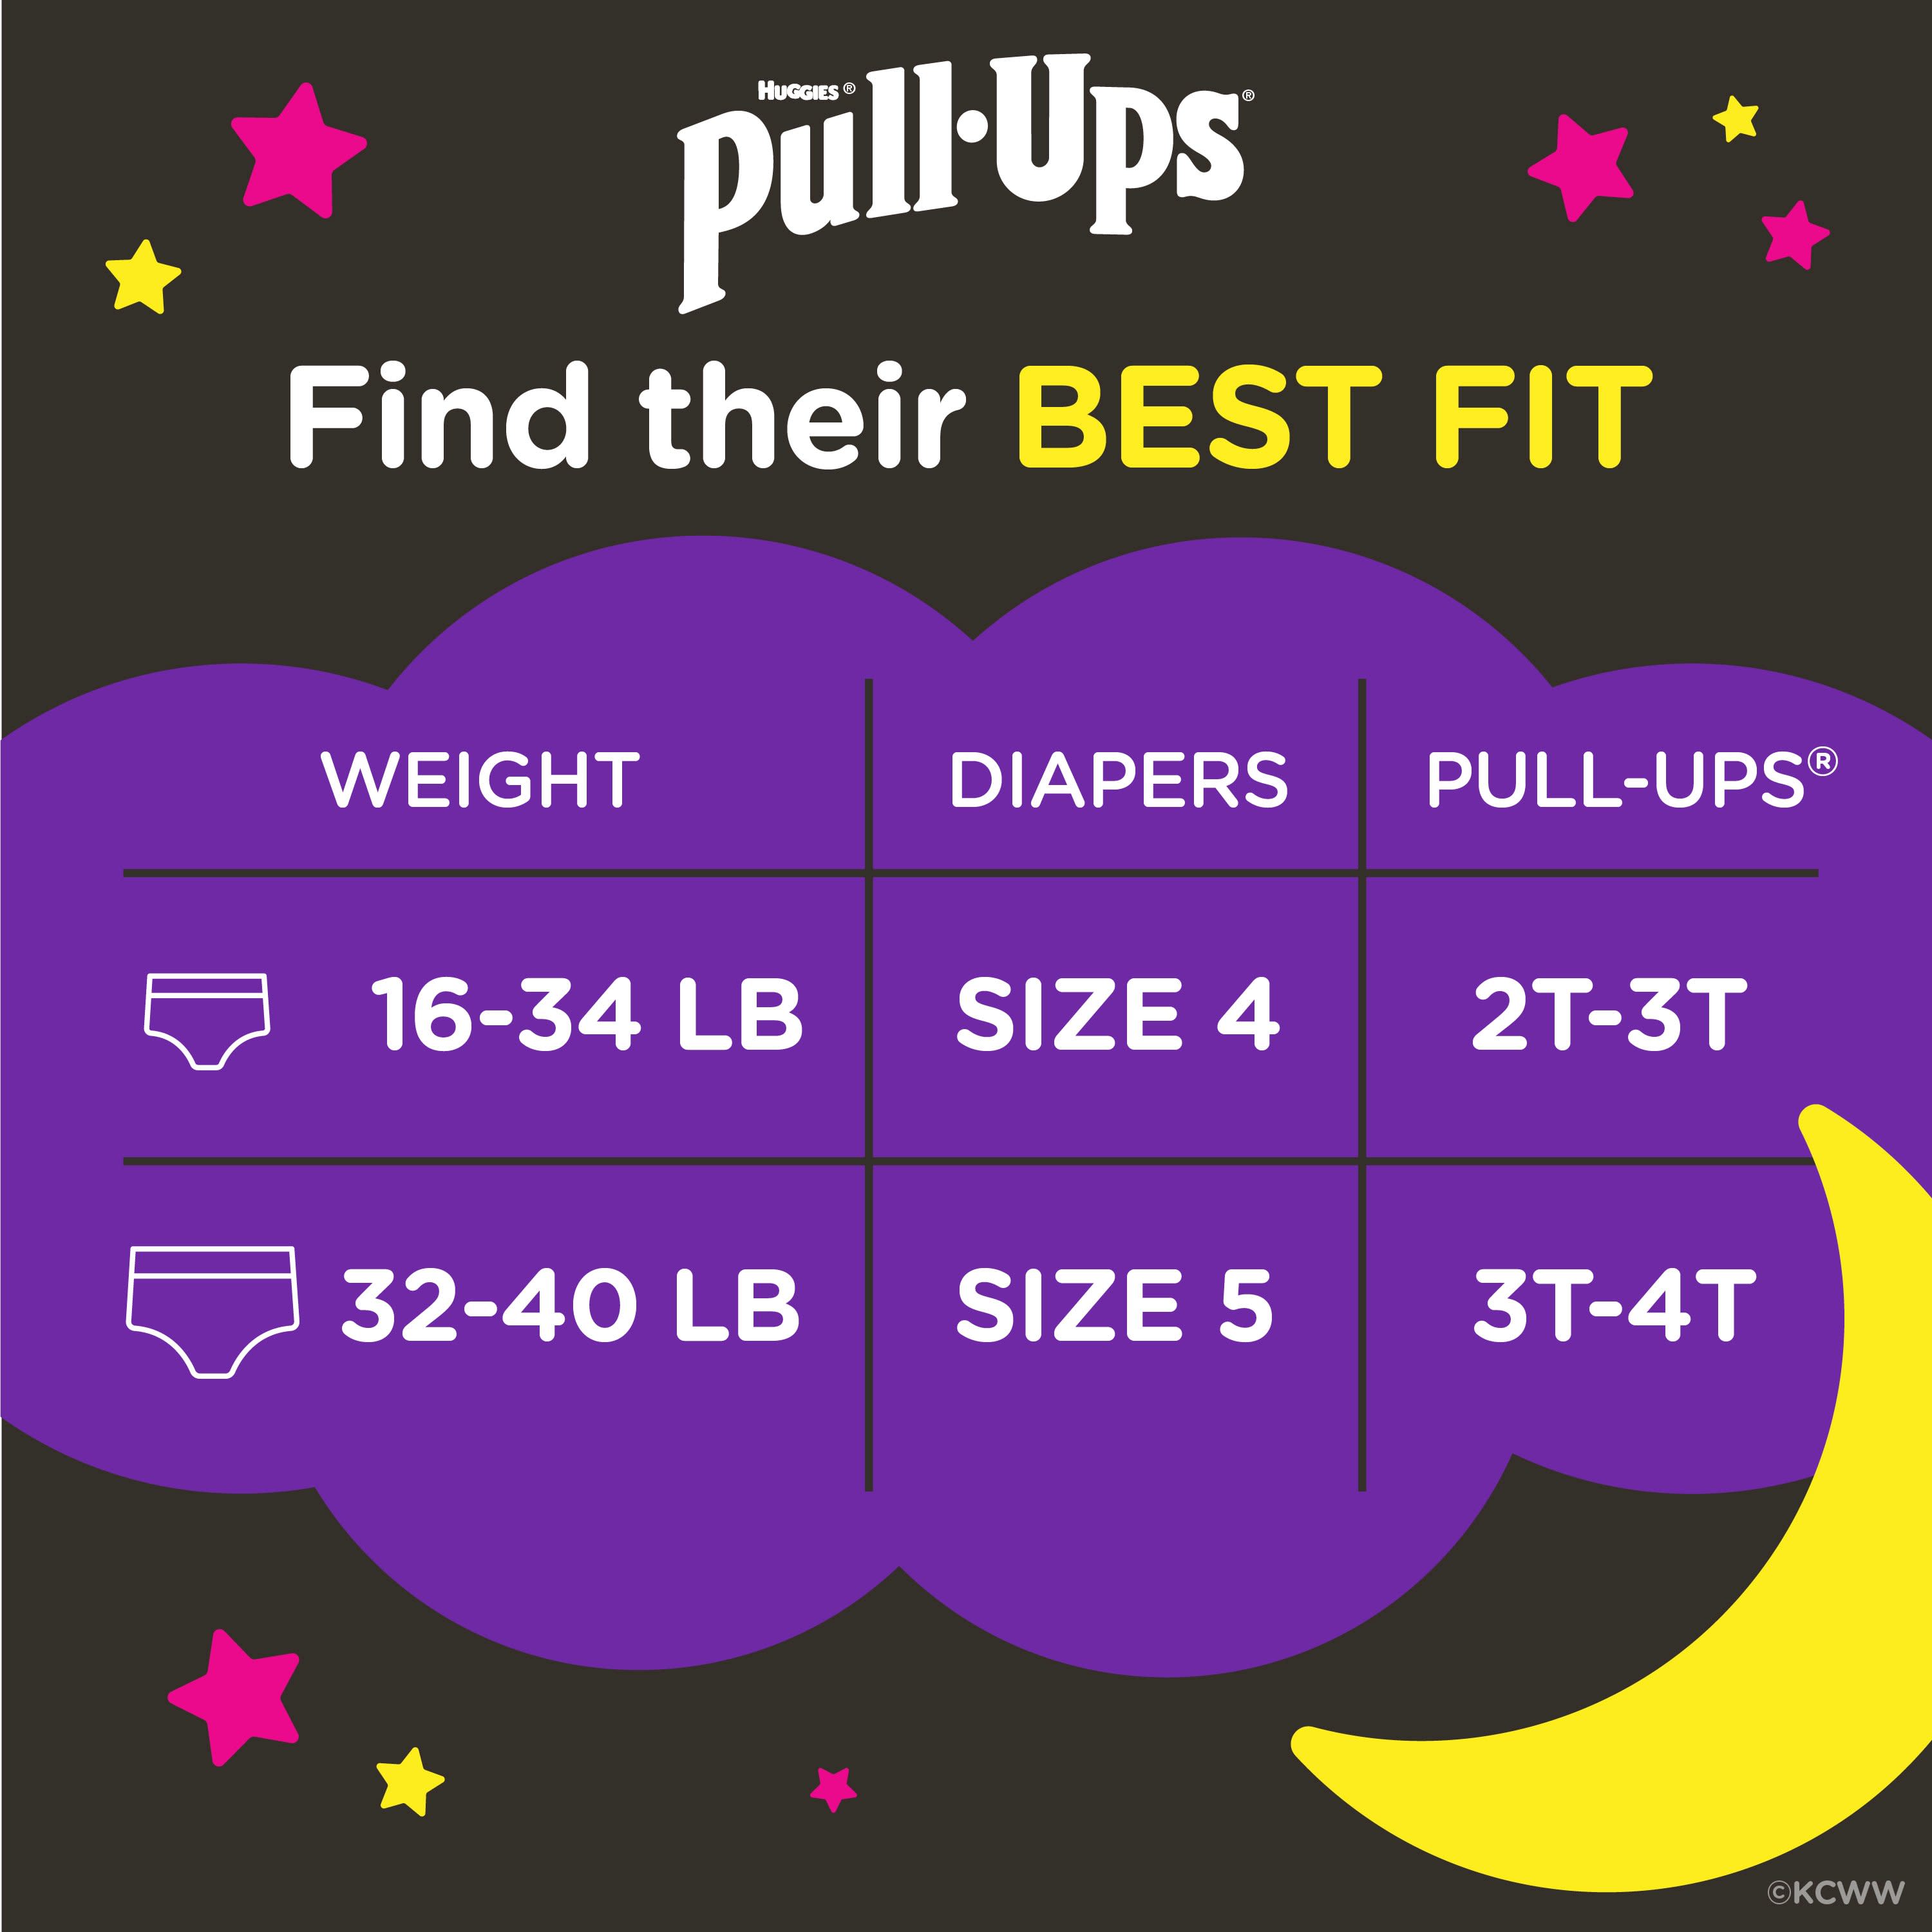 Pull-Ups Girls' Night-Time Training Pants, 3T-4T (32-40 lbs), 60 Ct (Select for More Options) - image 4 of 12